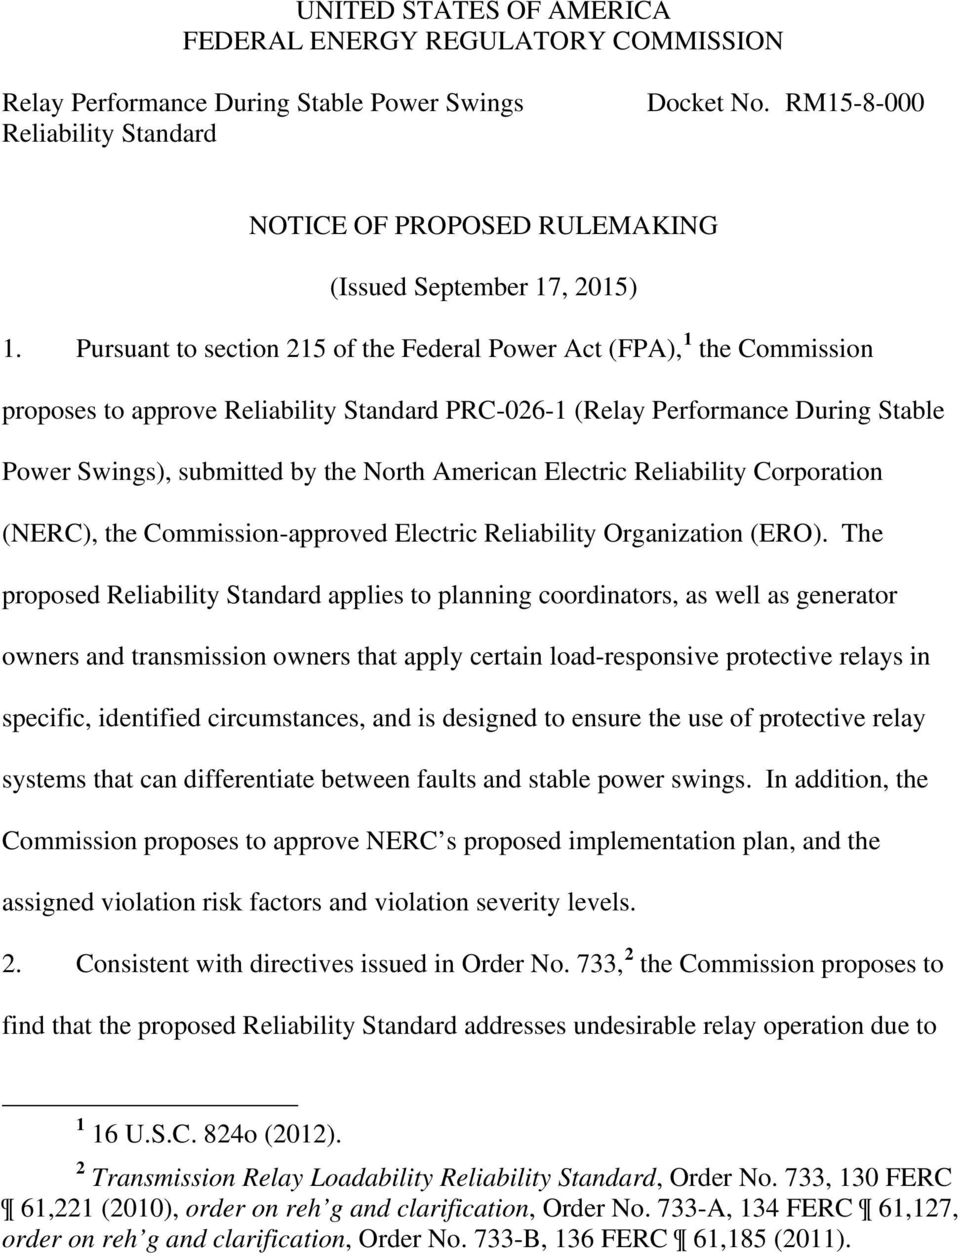 Pursuant to section 215 of the Federal Power Act (FPA), 1 the Commission proposes to approve Reliability Standard PRC-026-1 (Relay Performance During Stable Power Swings), submitted by the North